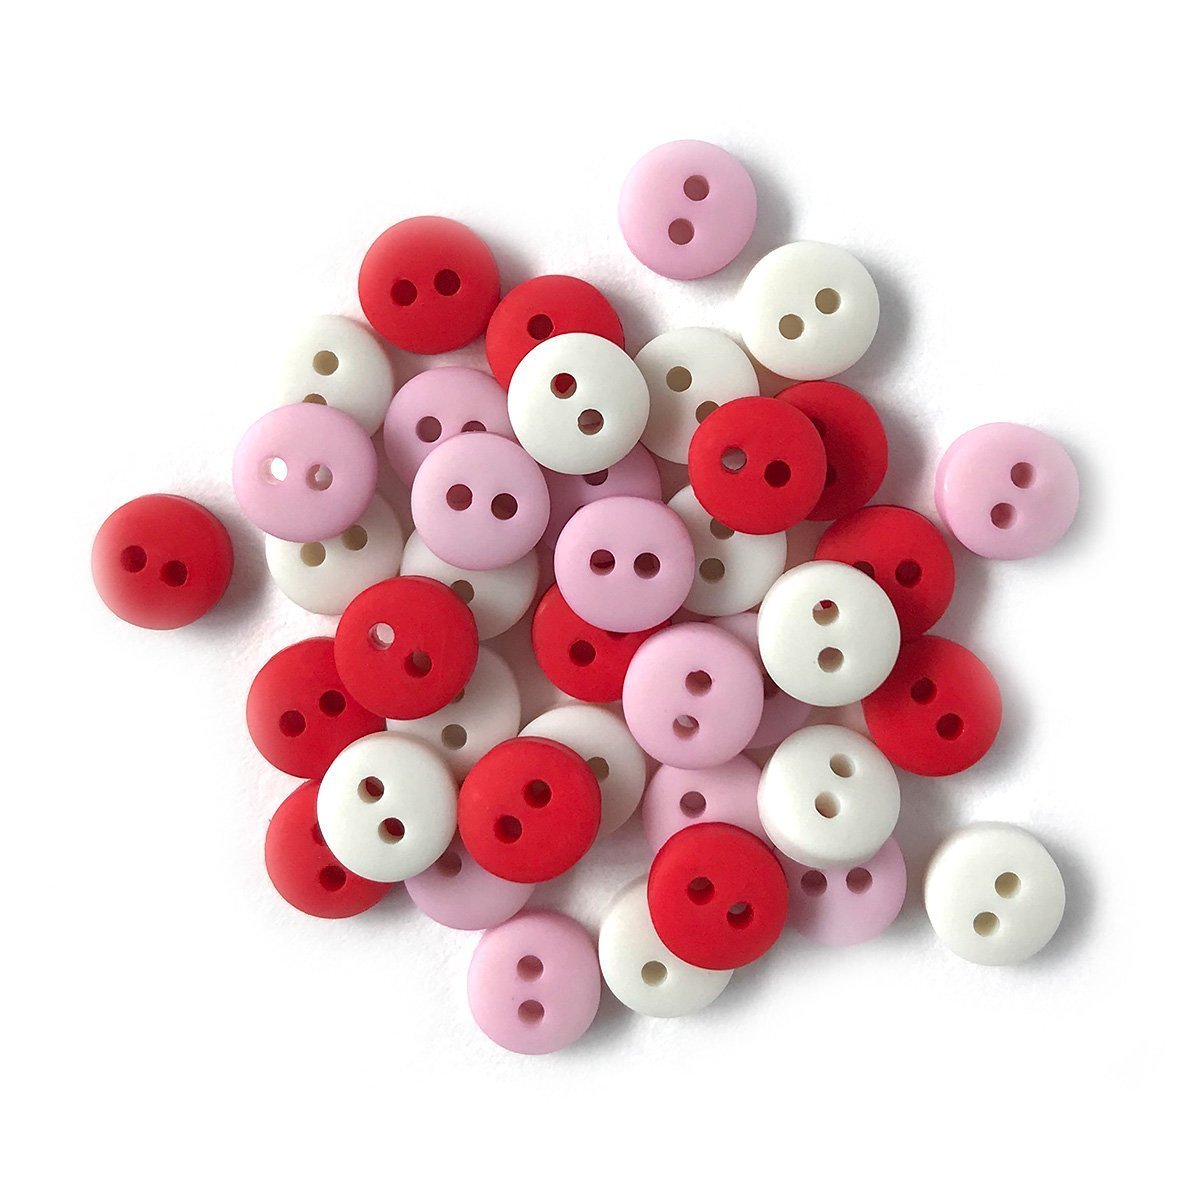 Sweetheart - Buttons Galore and More